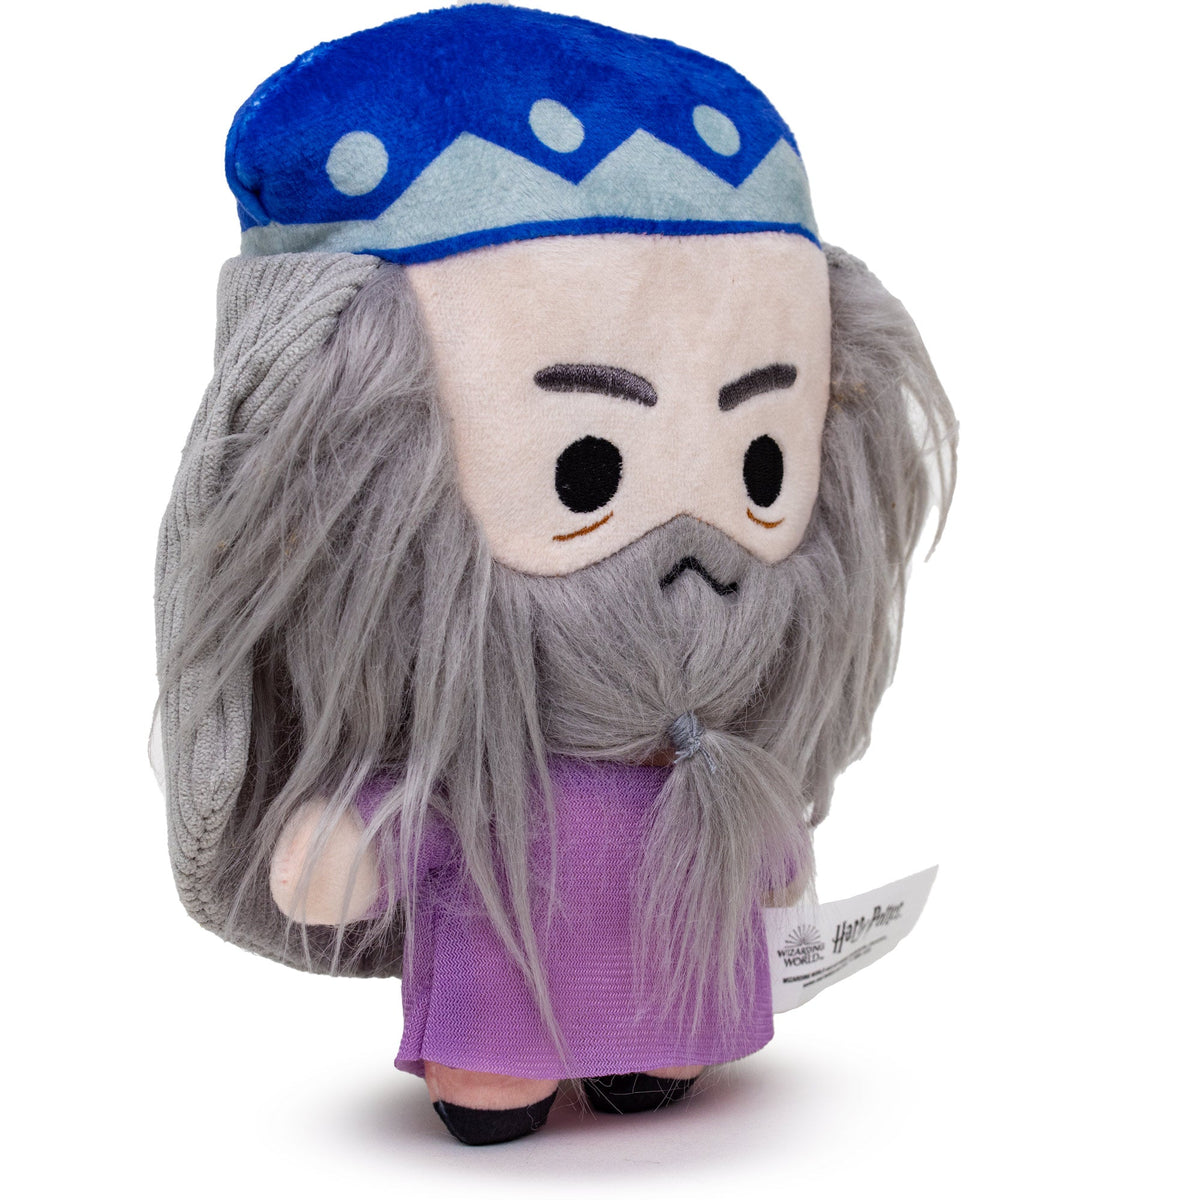 Dog Toy Squeaker Plush - Harry Potter Dumbledore Standing Charm Full Body Pose